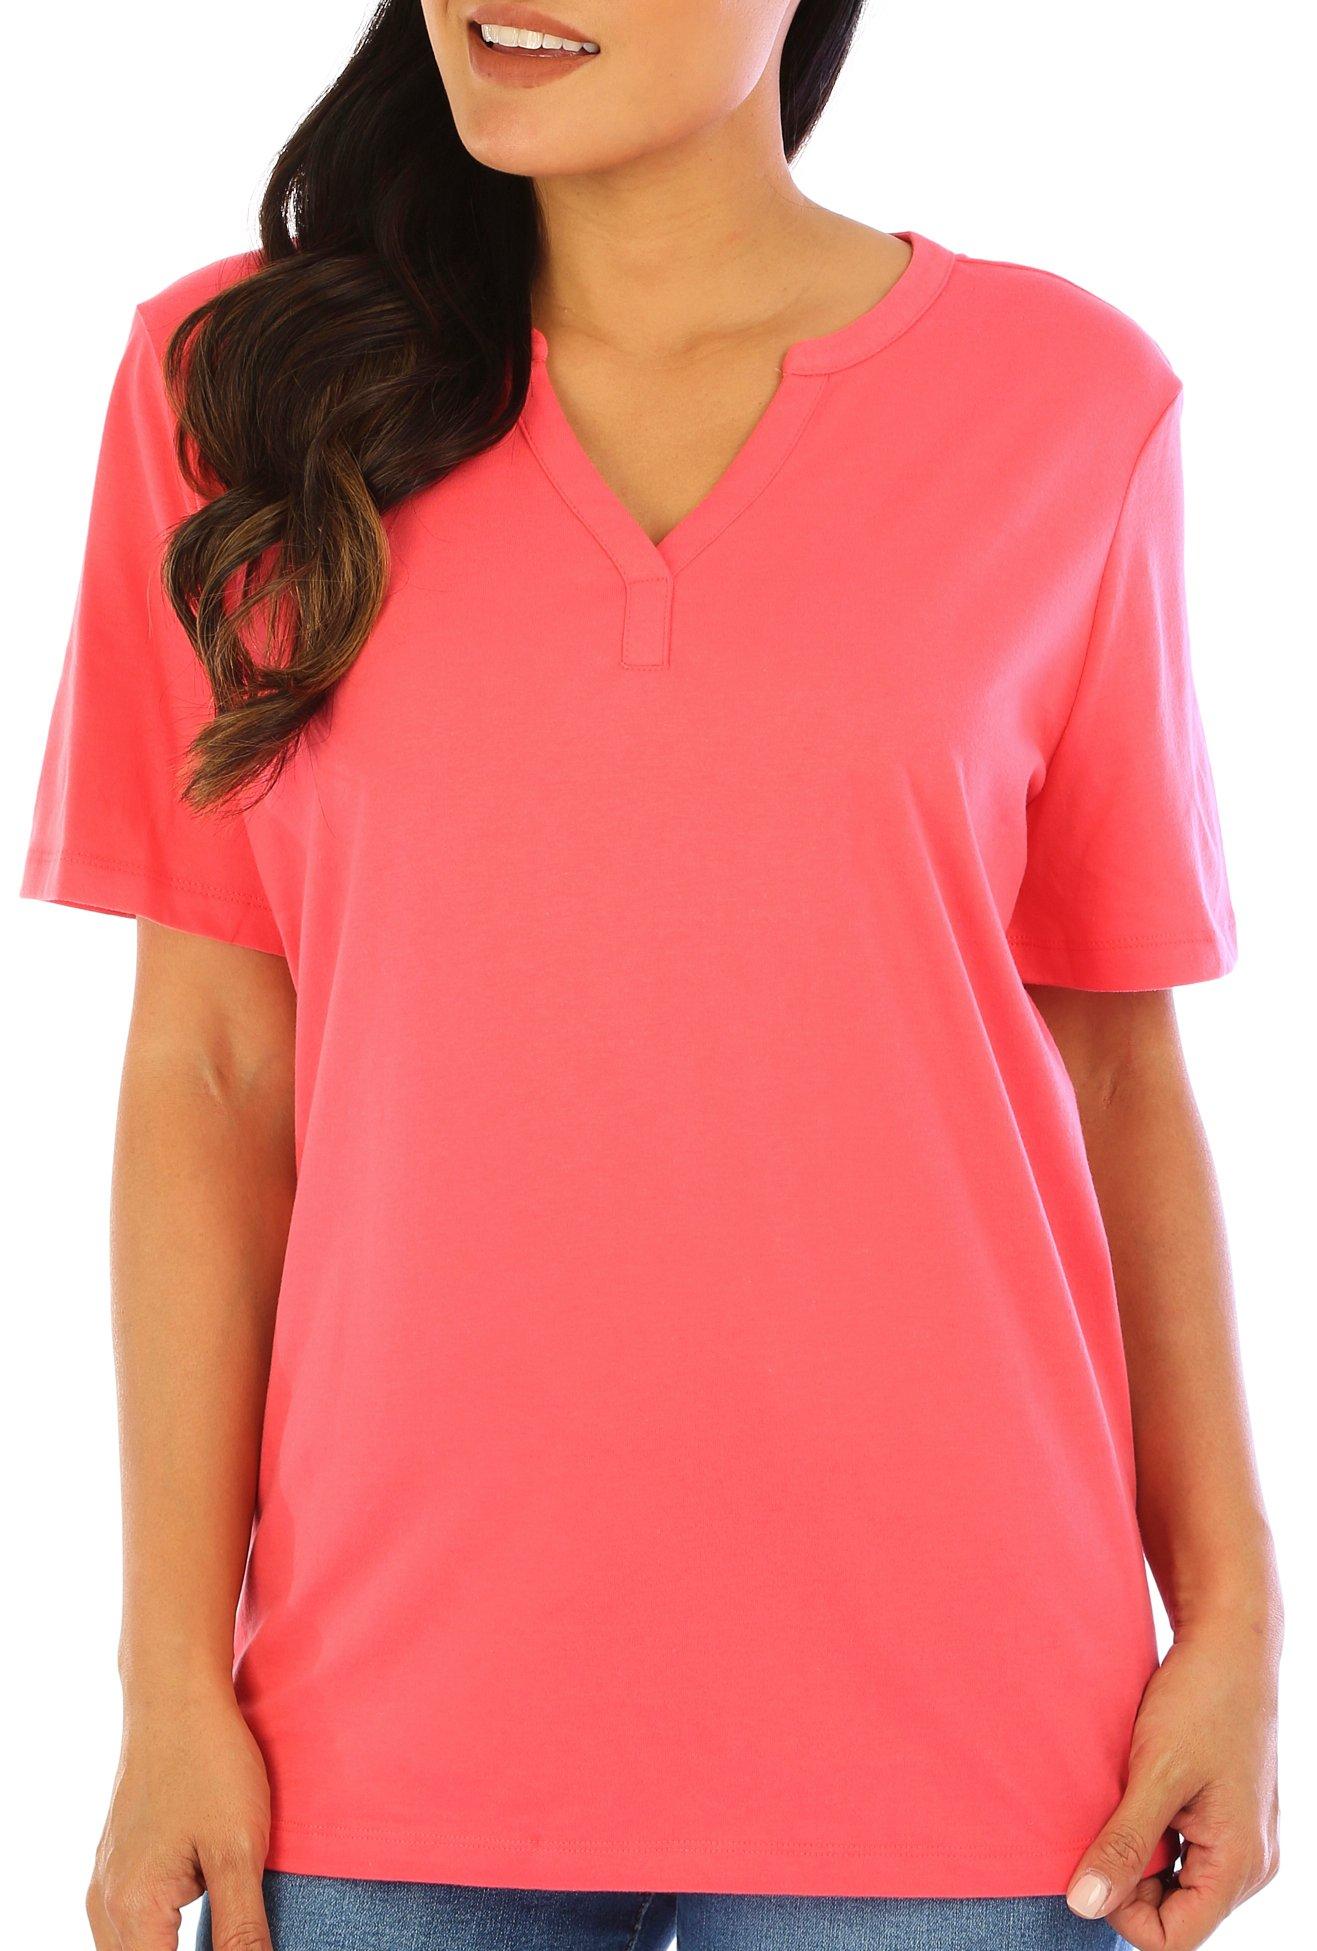 Coral Bay Womens Solid Henley Style Short Sleeve Top